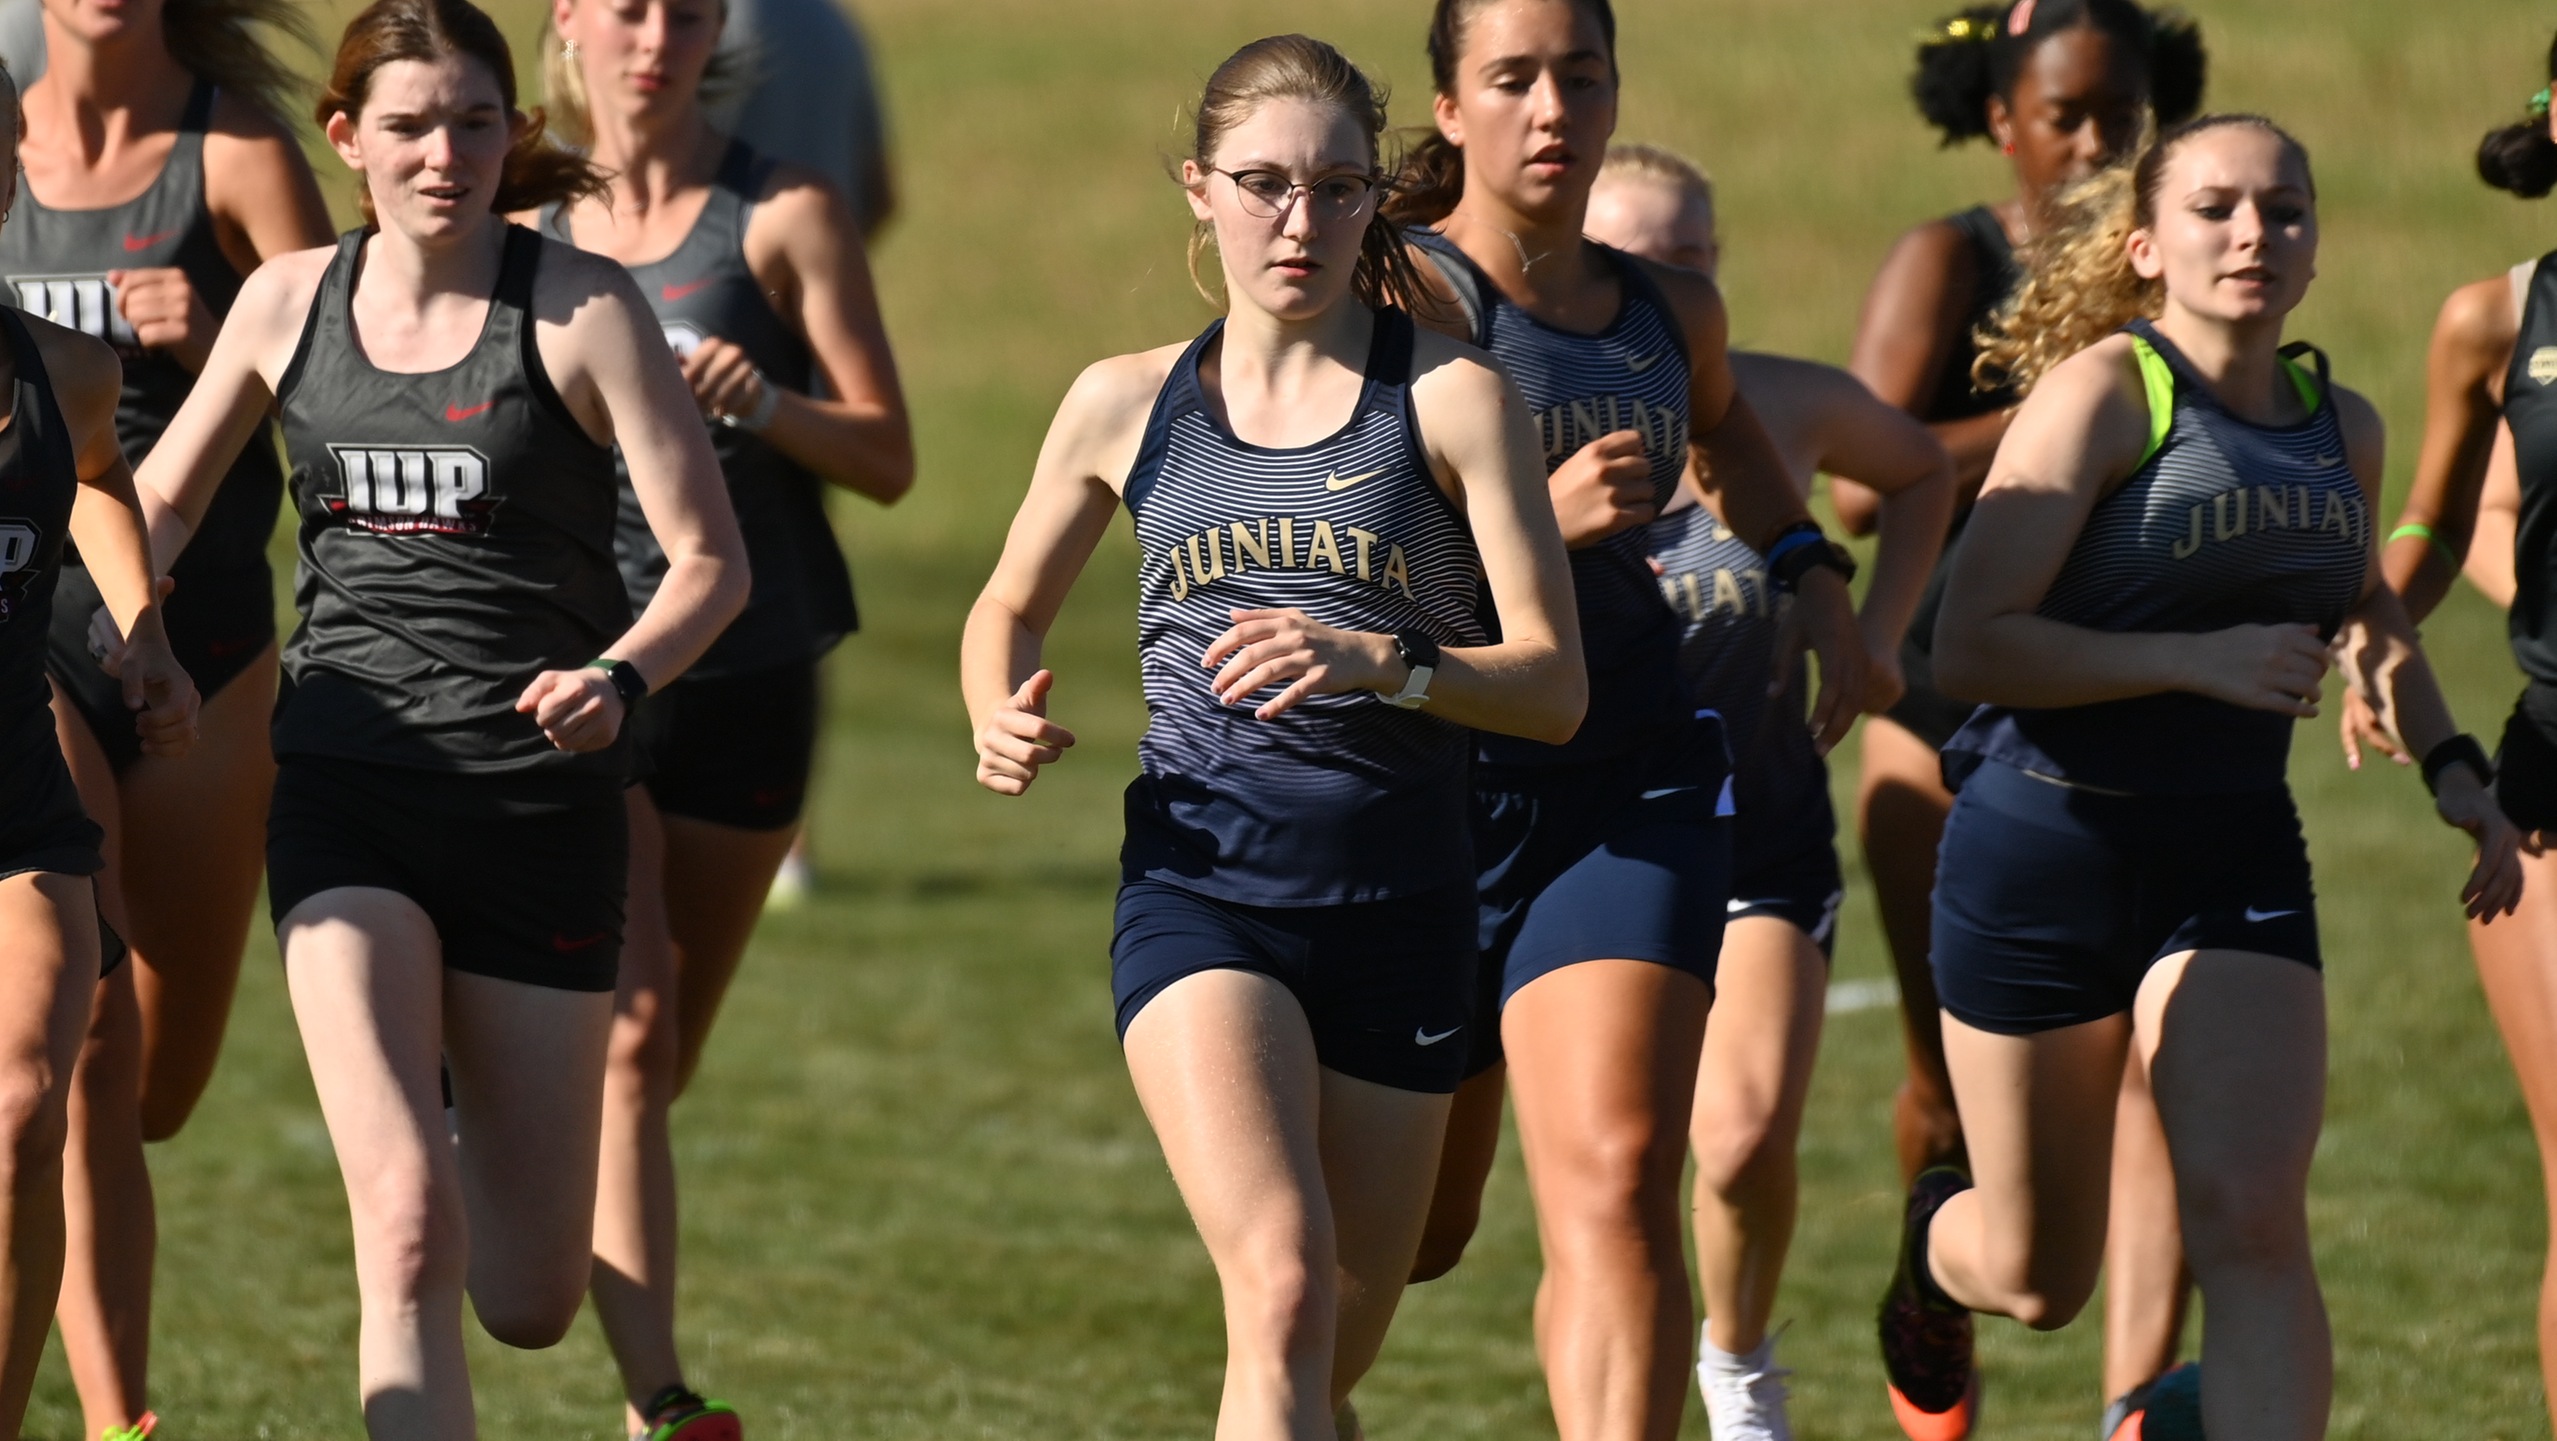 Women's Cross Country Sets 6K PRs at Aubrey Shenk Invite